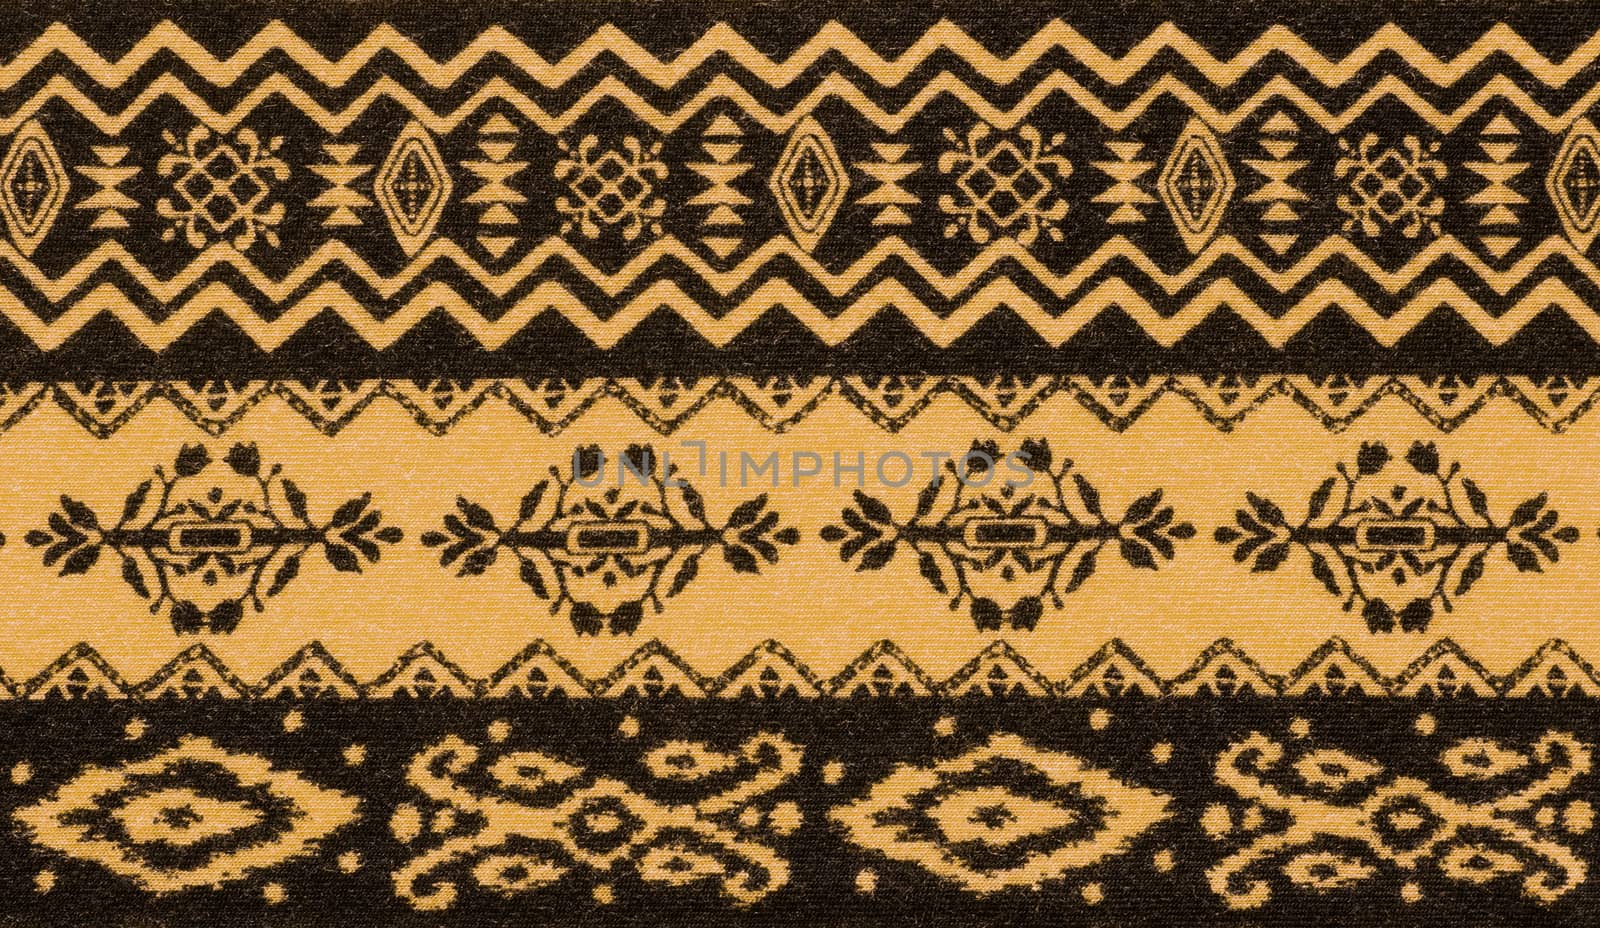 cloth. yellow and black color bohemian style, Boho, vintage, retro texture background